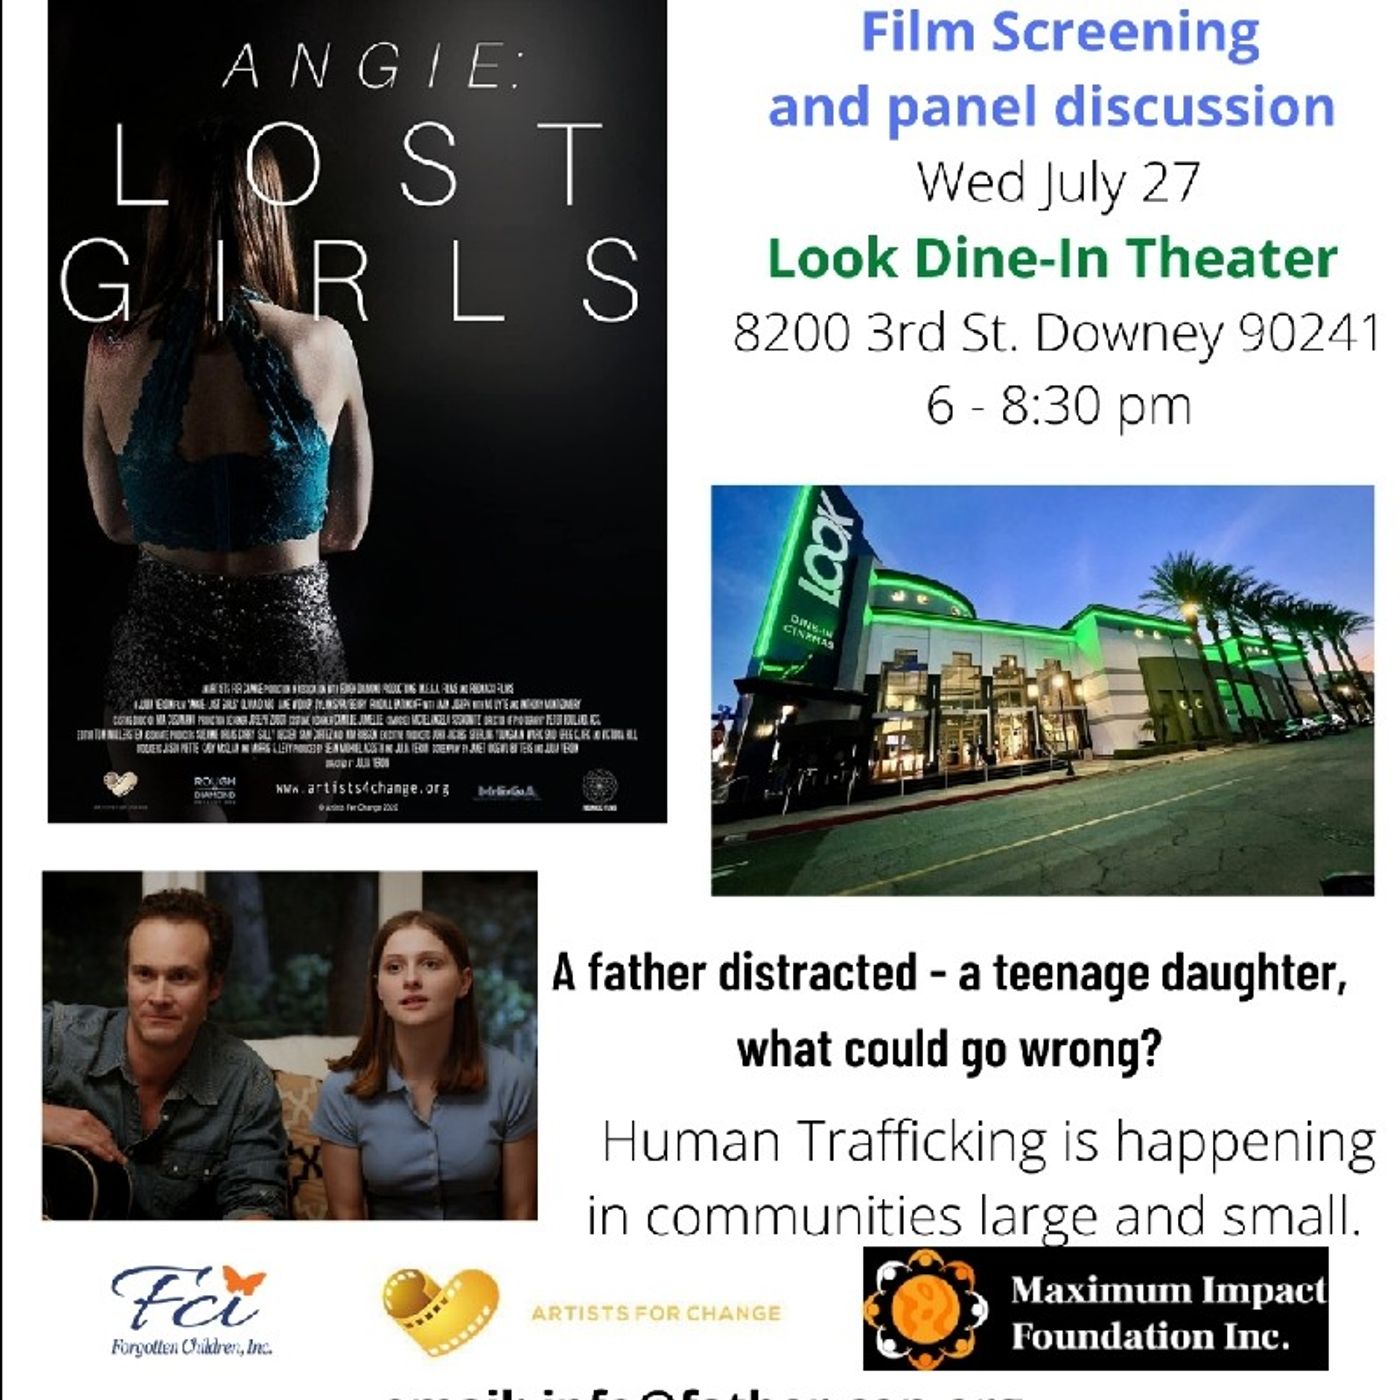 Pre-screening of ANGIE: LOST GIRLS by Father-Con.com